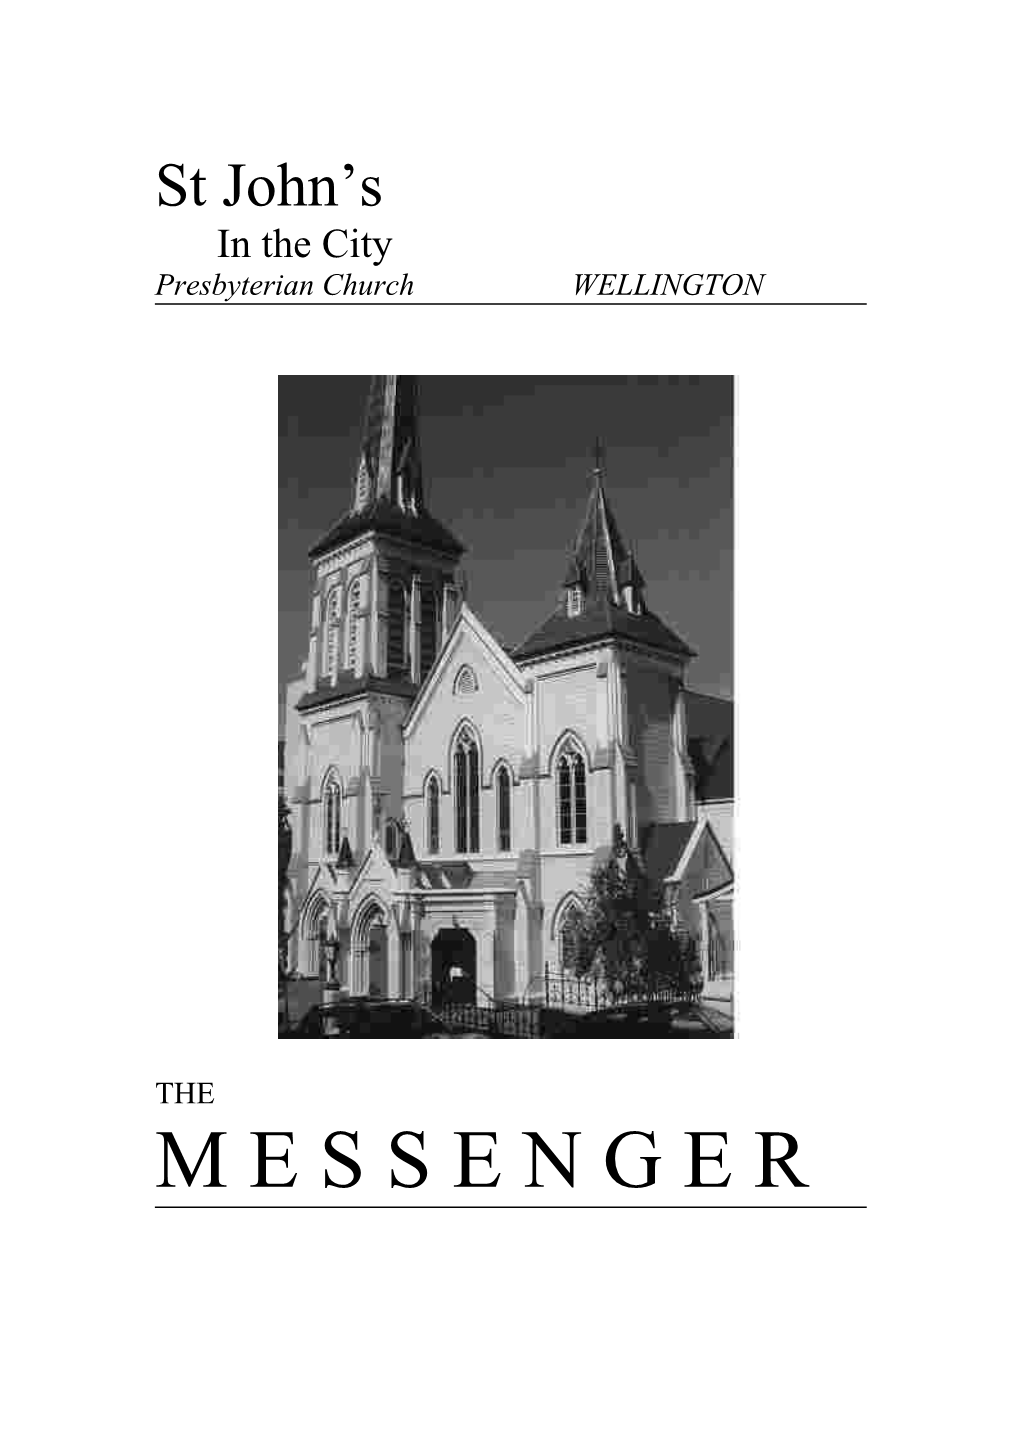 THE MESSENGER Is Published Quarterly By